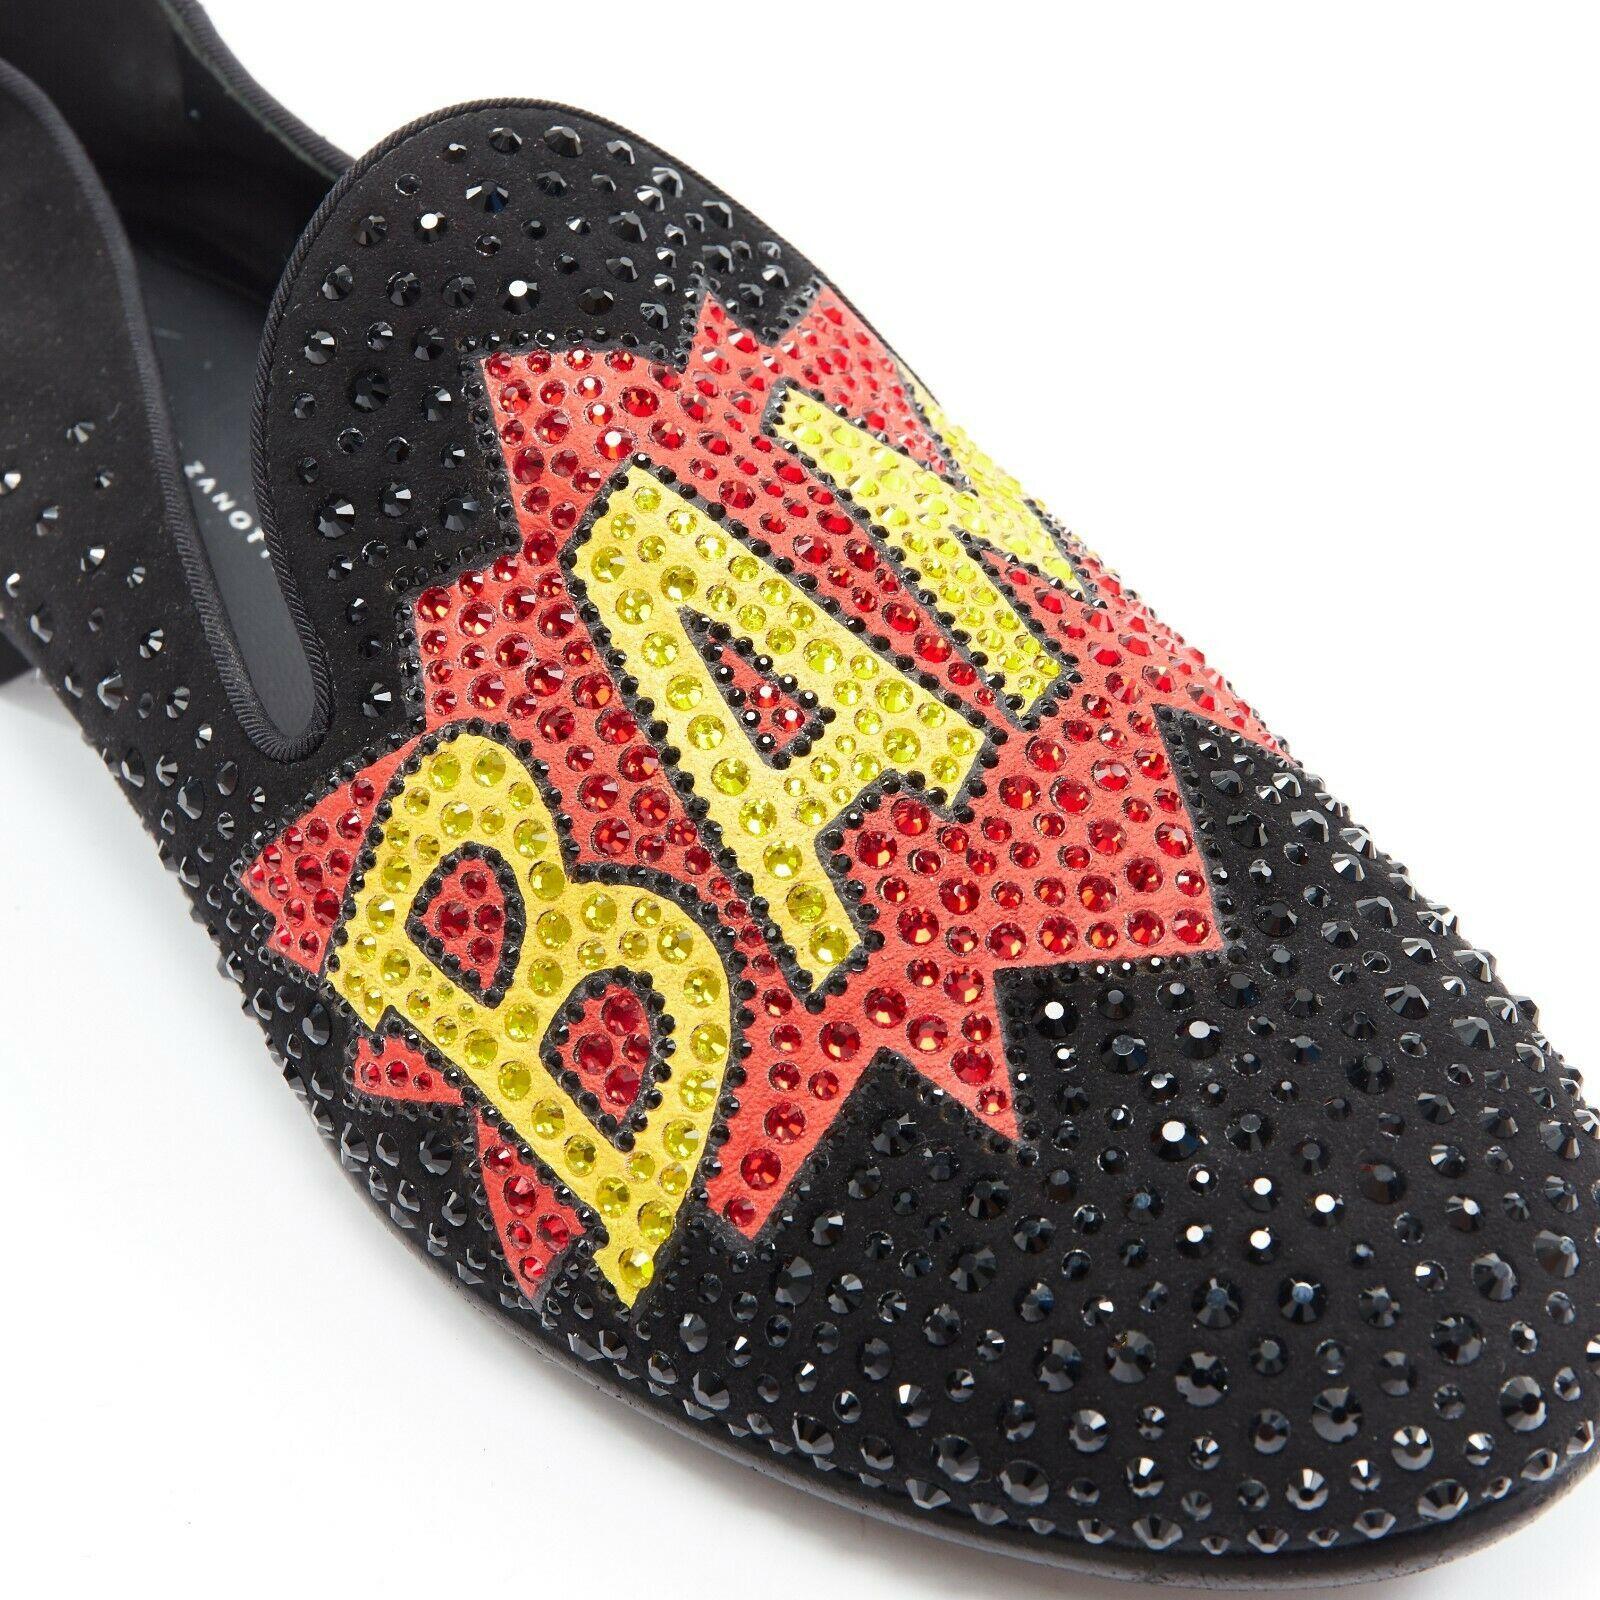 GIUSEPPE ZANOTTI 2019 Bam crystal embellished pop art black suede loafer EU44
GIUSEPPE ZANOTTI
FROM THE SPRING SUMMER 2019 COLLECTION
Black suede leather upper. 
Pop art inspired Bam! graphic. 
Rhinestone crystal embellishment. 
Round toe.